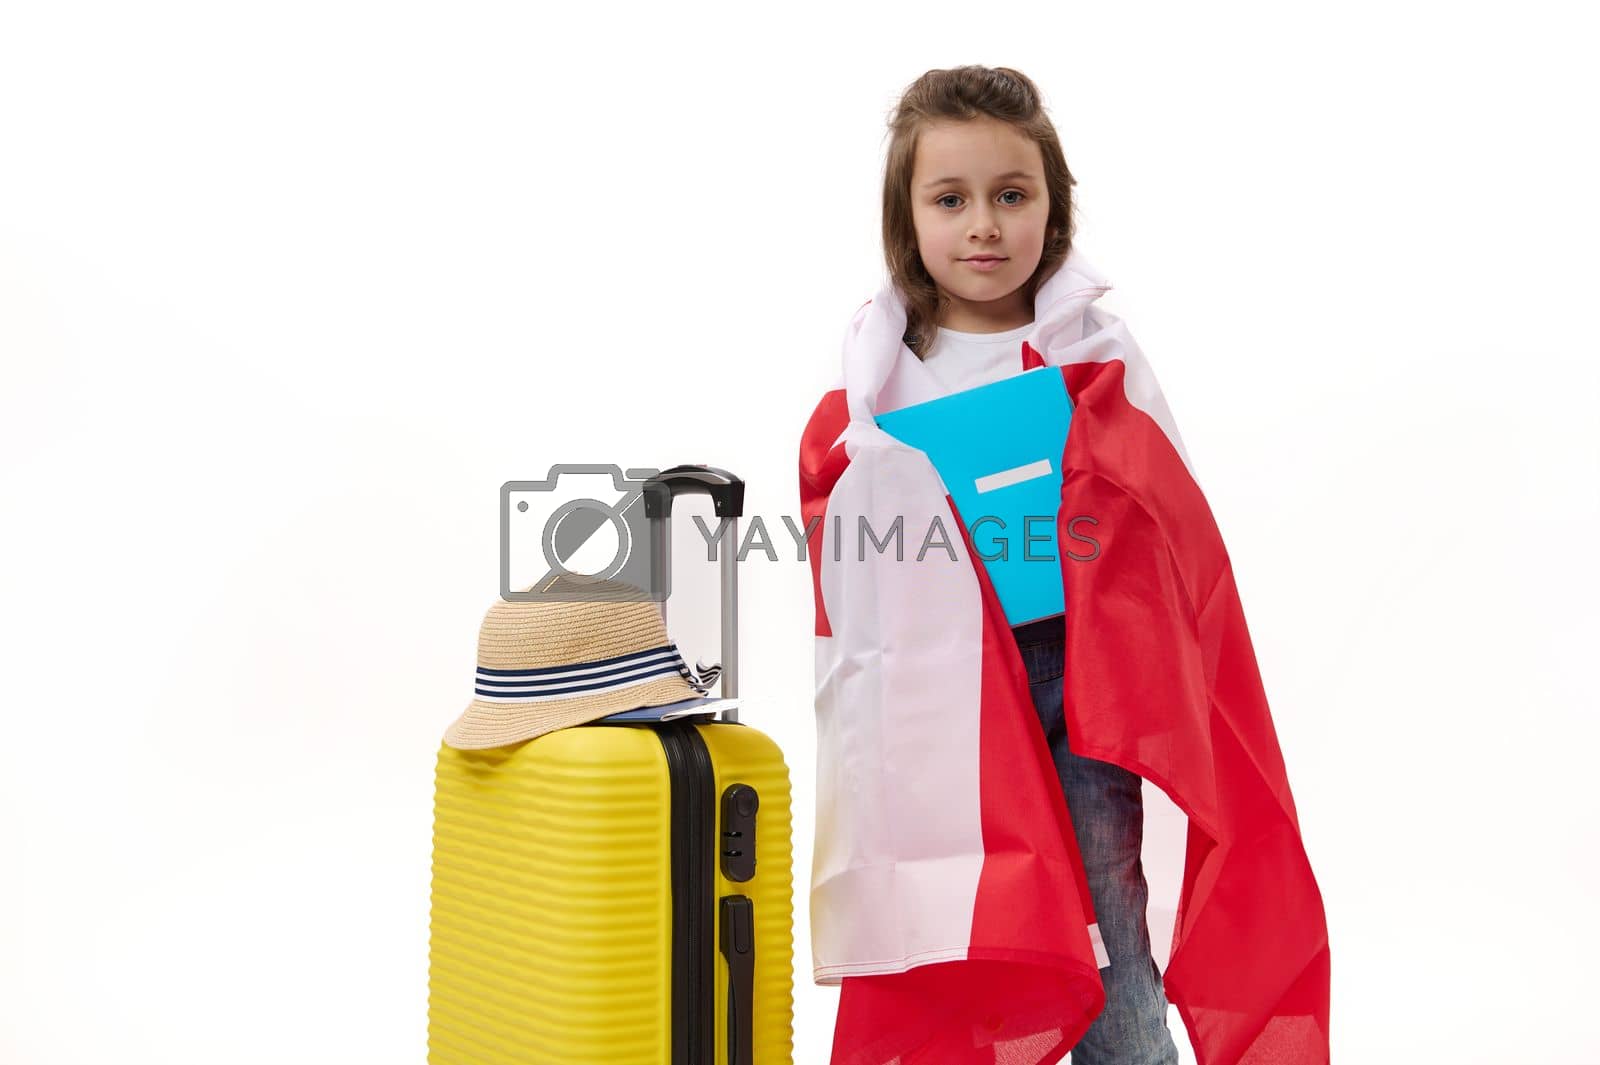 Royalty free image of Happy first grader, little girl wrapping in Canada flag, holding a copybook, posing with suitcase over white background. by artgf